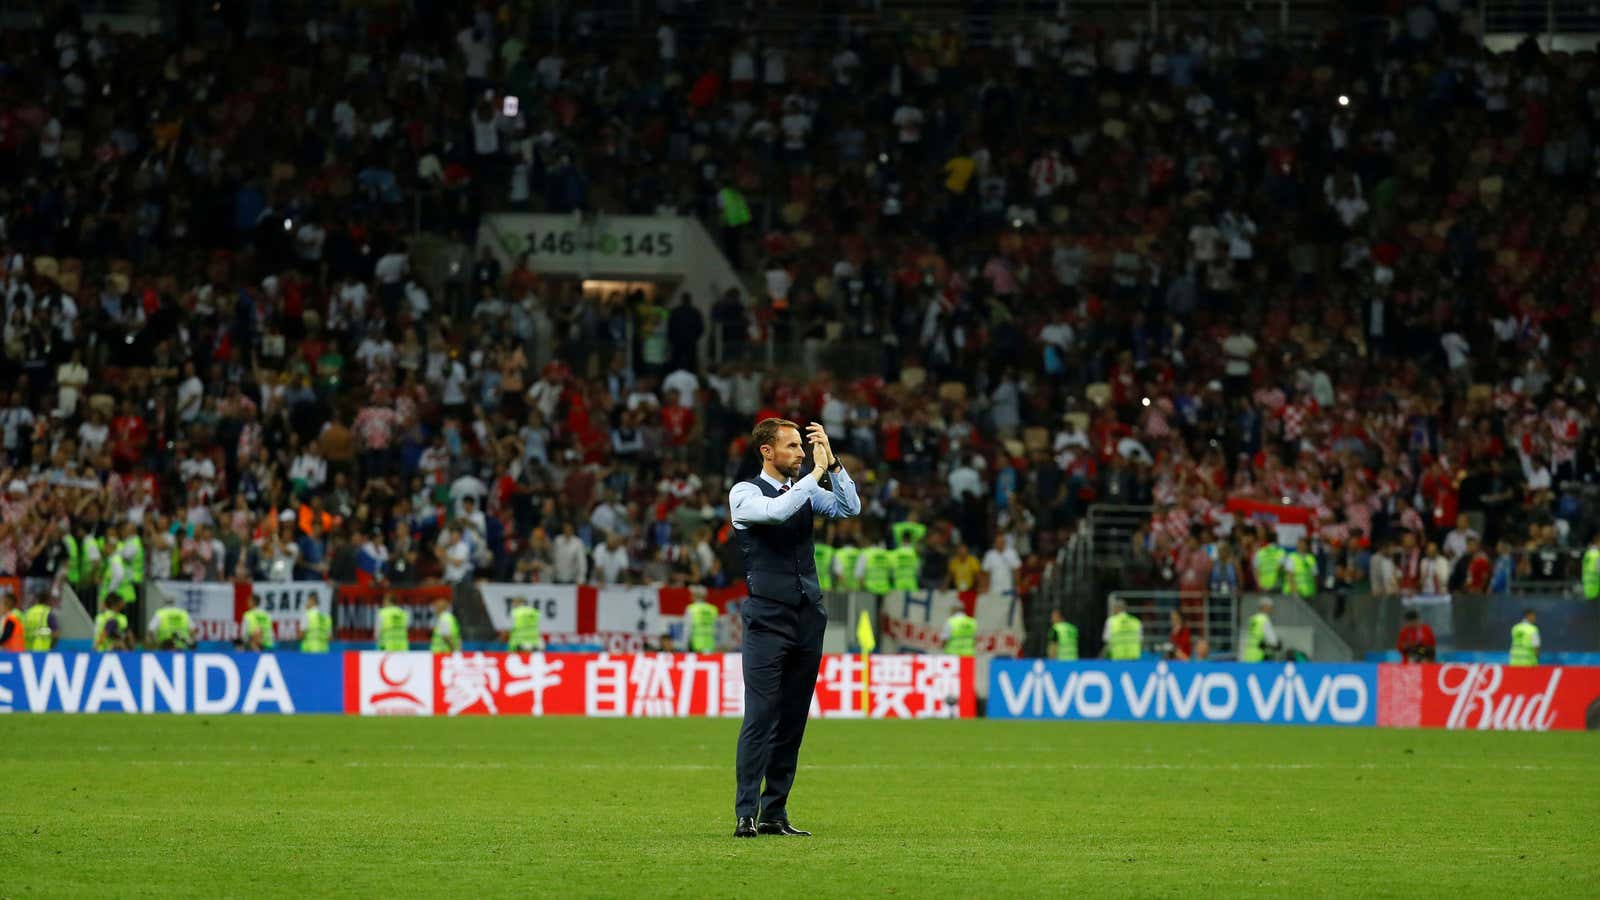 England coach Gareth Southgate applauded the fans after Croatia bumped his team from the final.